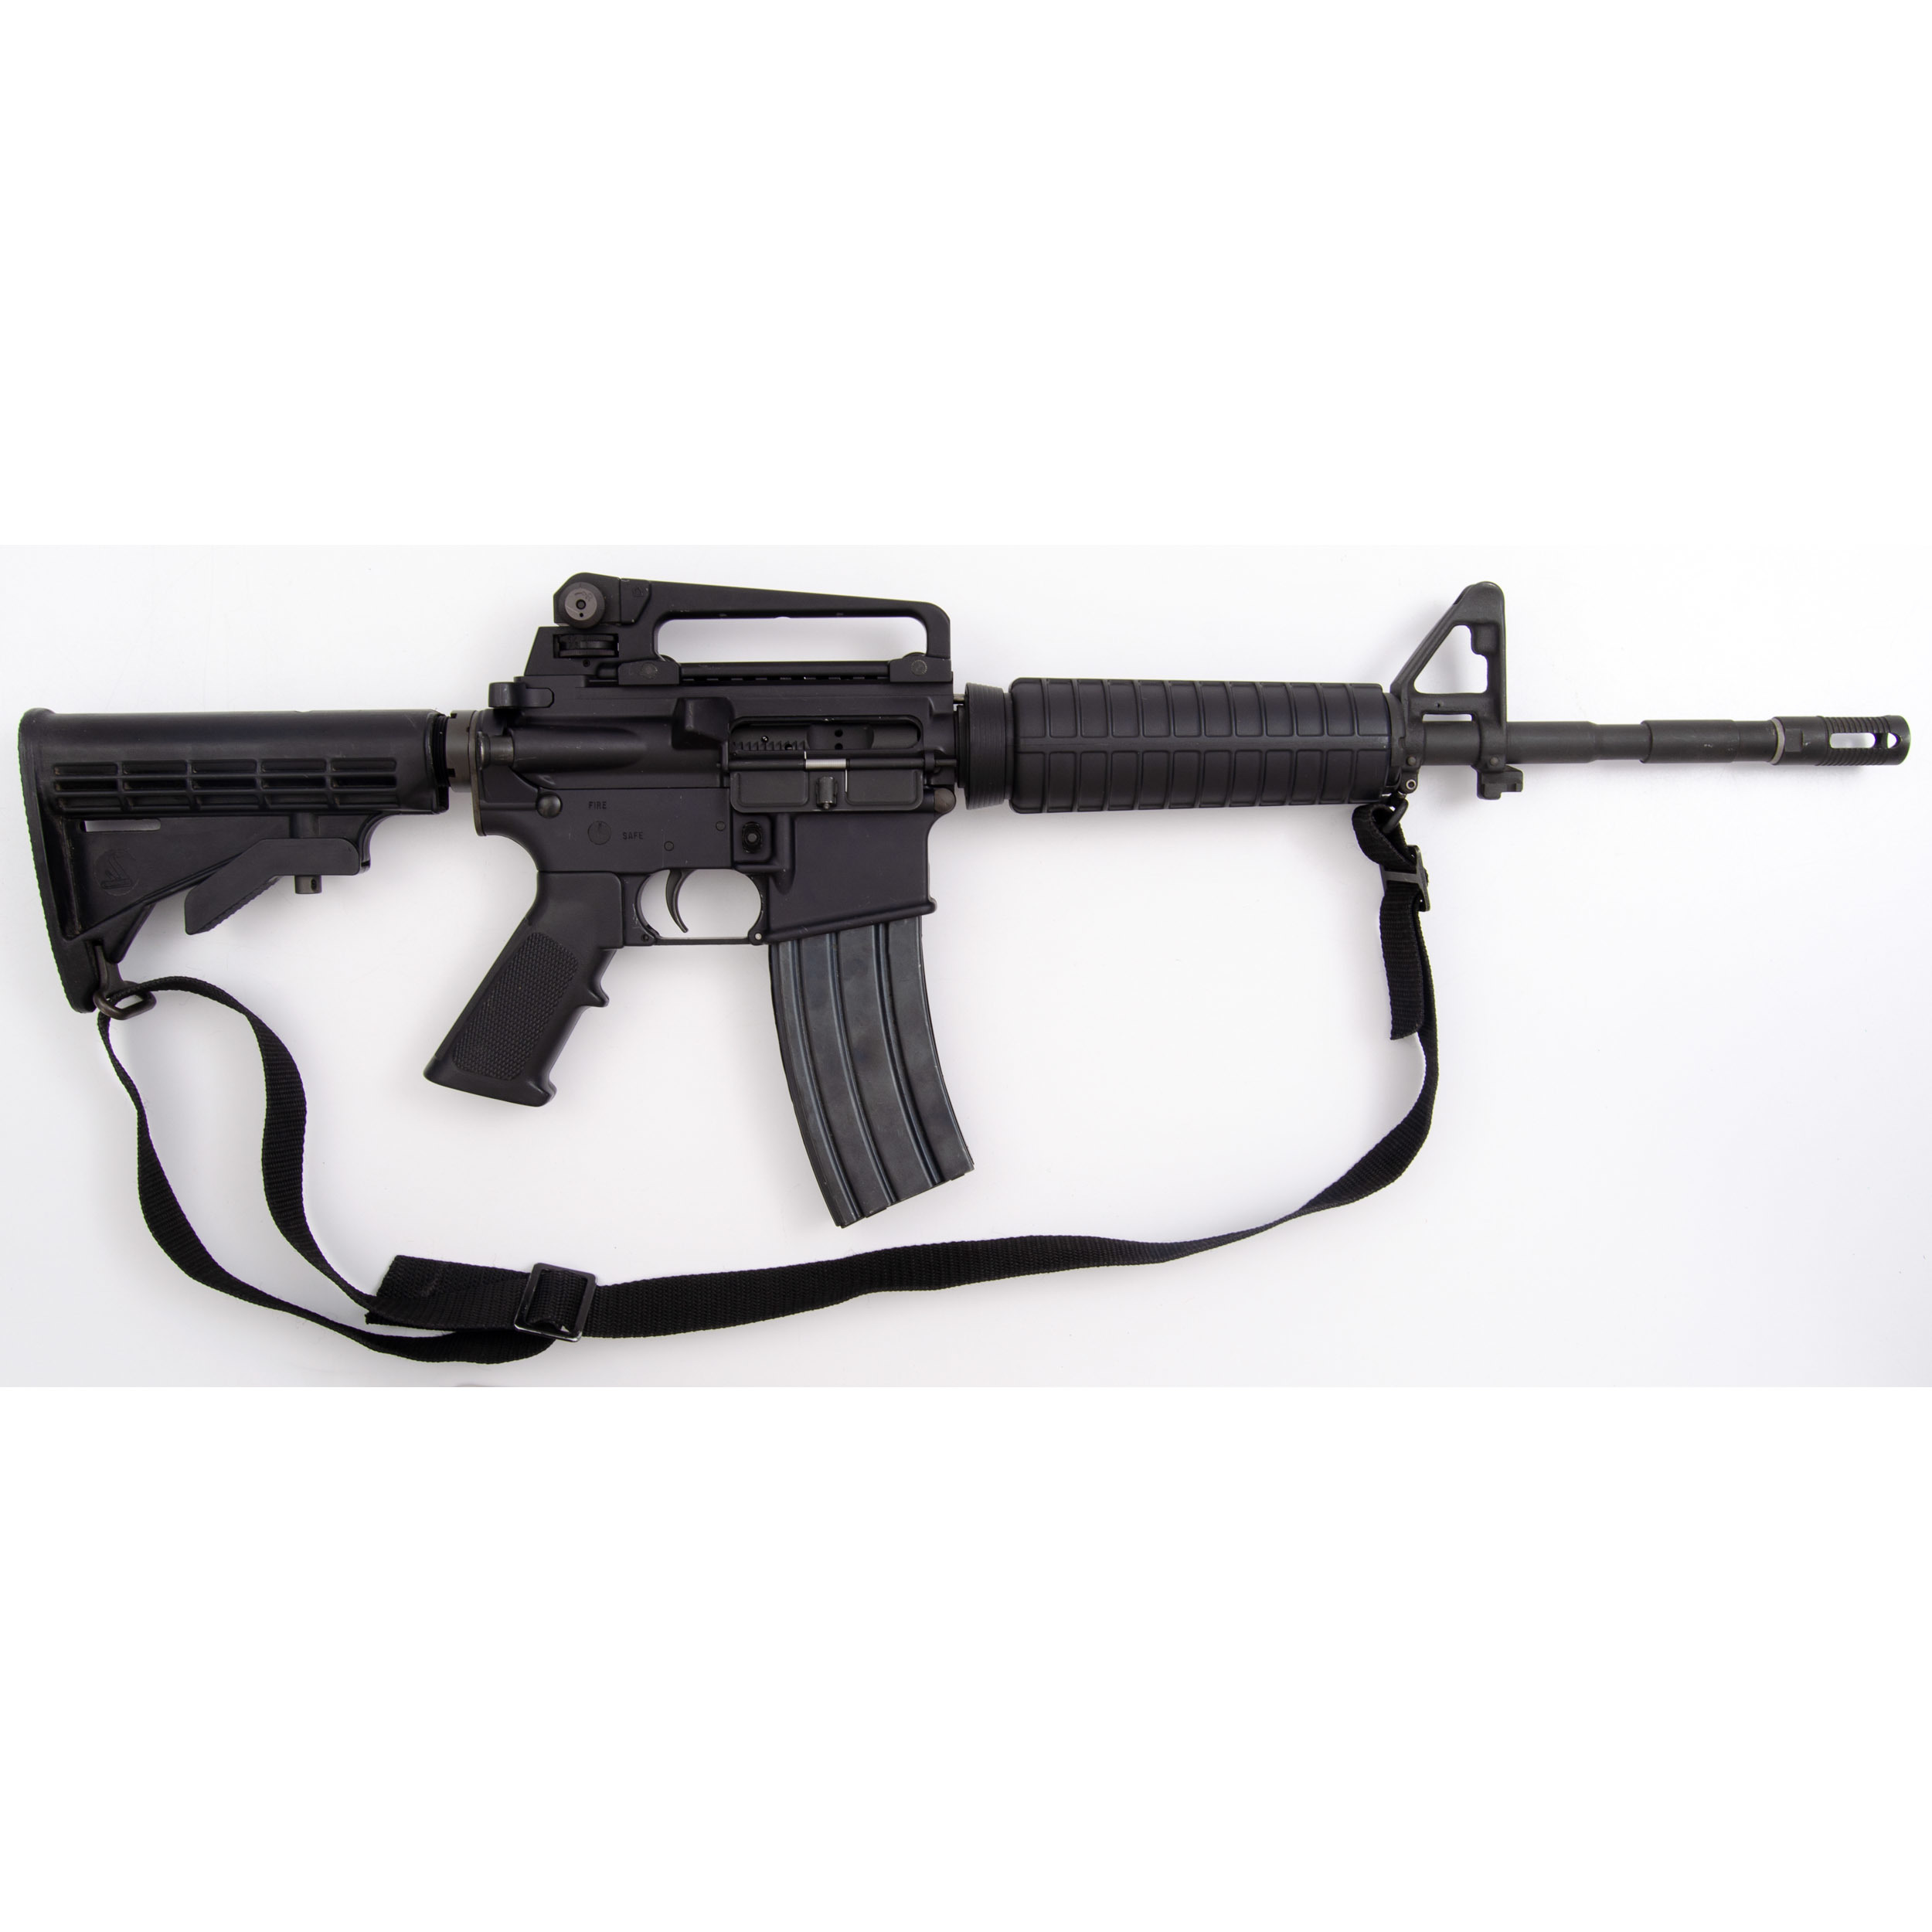 Bushmaster Serial Number Starts With L